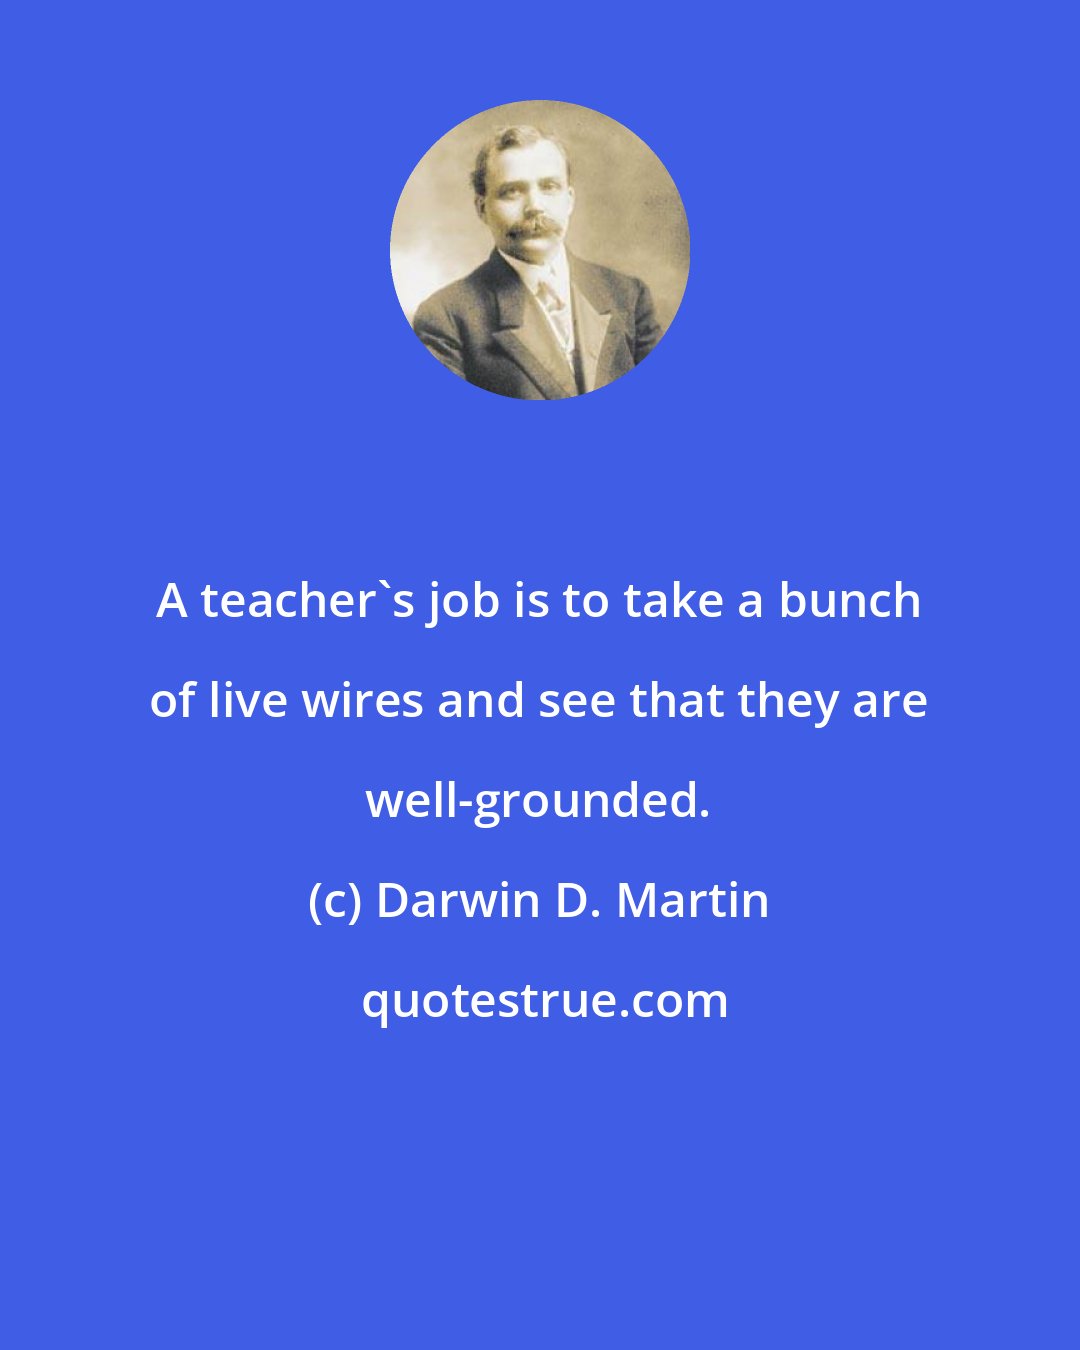 Darwin D. Martin: A teacher's job is to take a bunch of live wires and see that they are well-grounded.